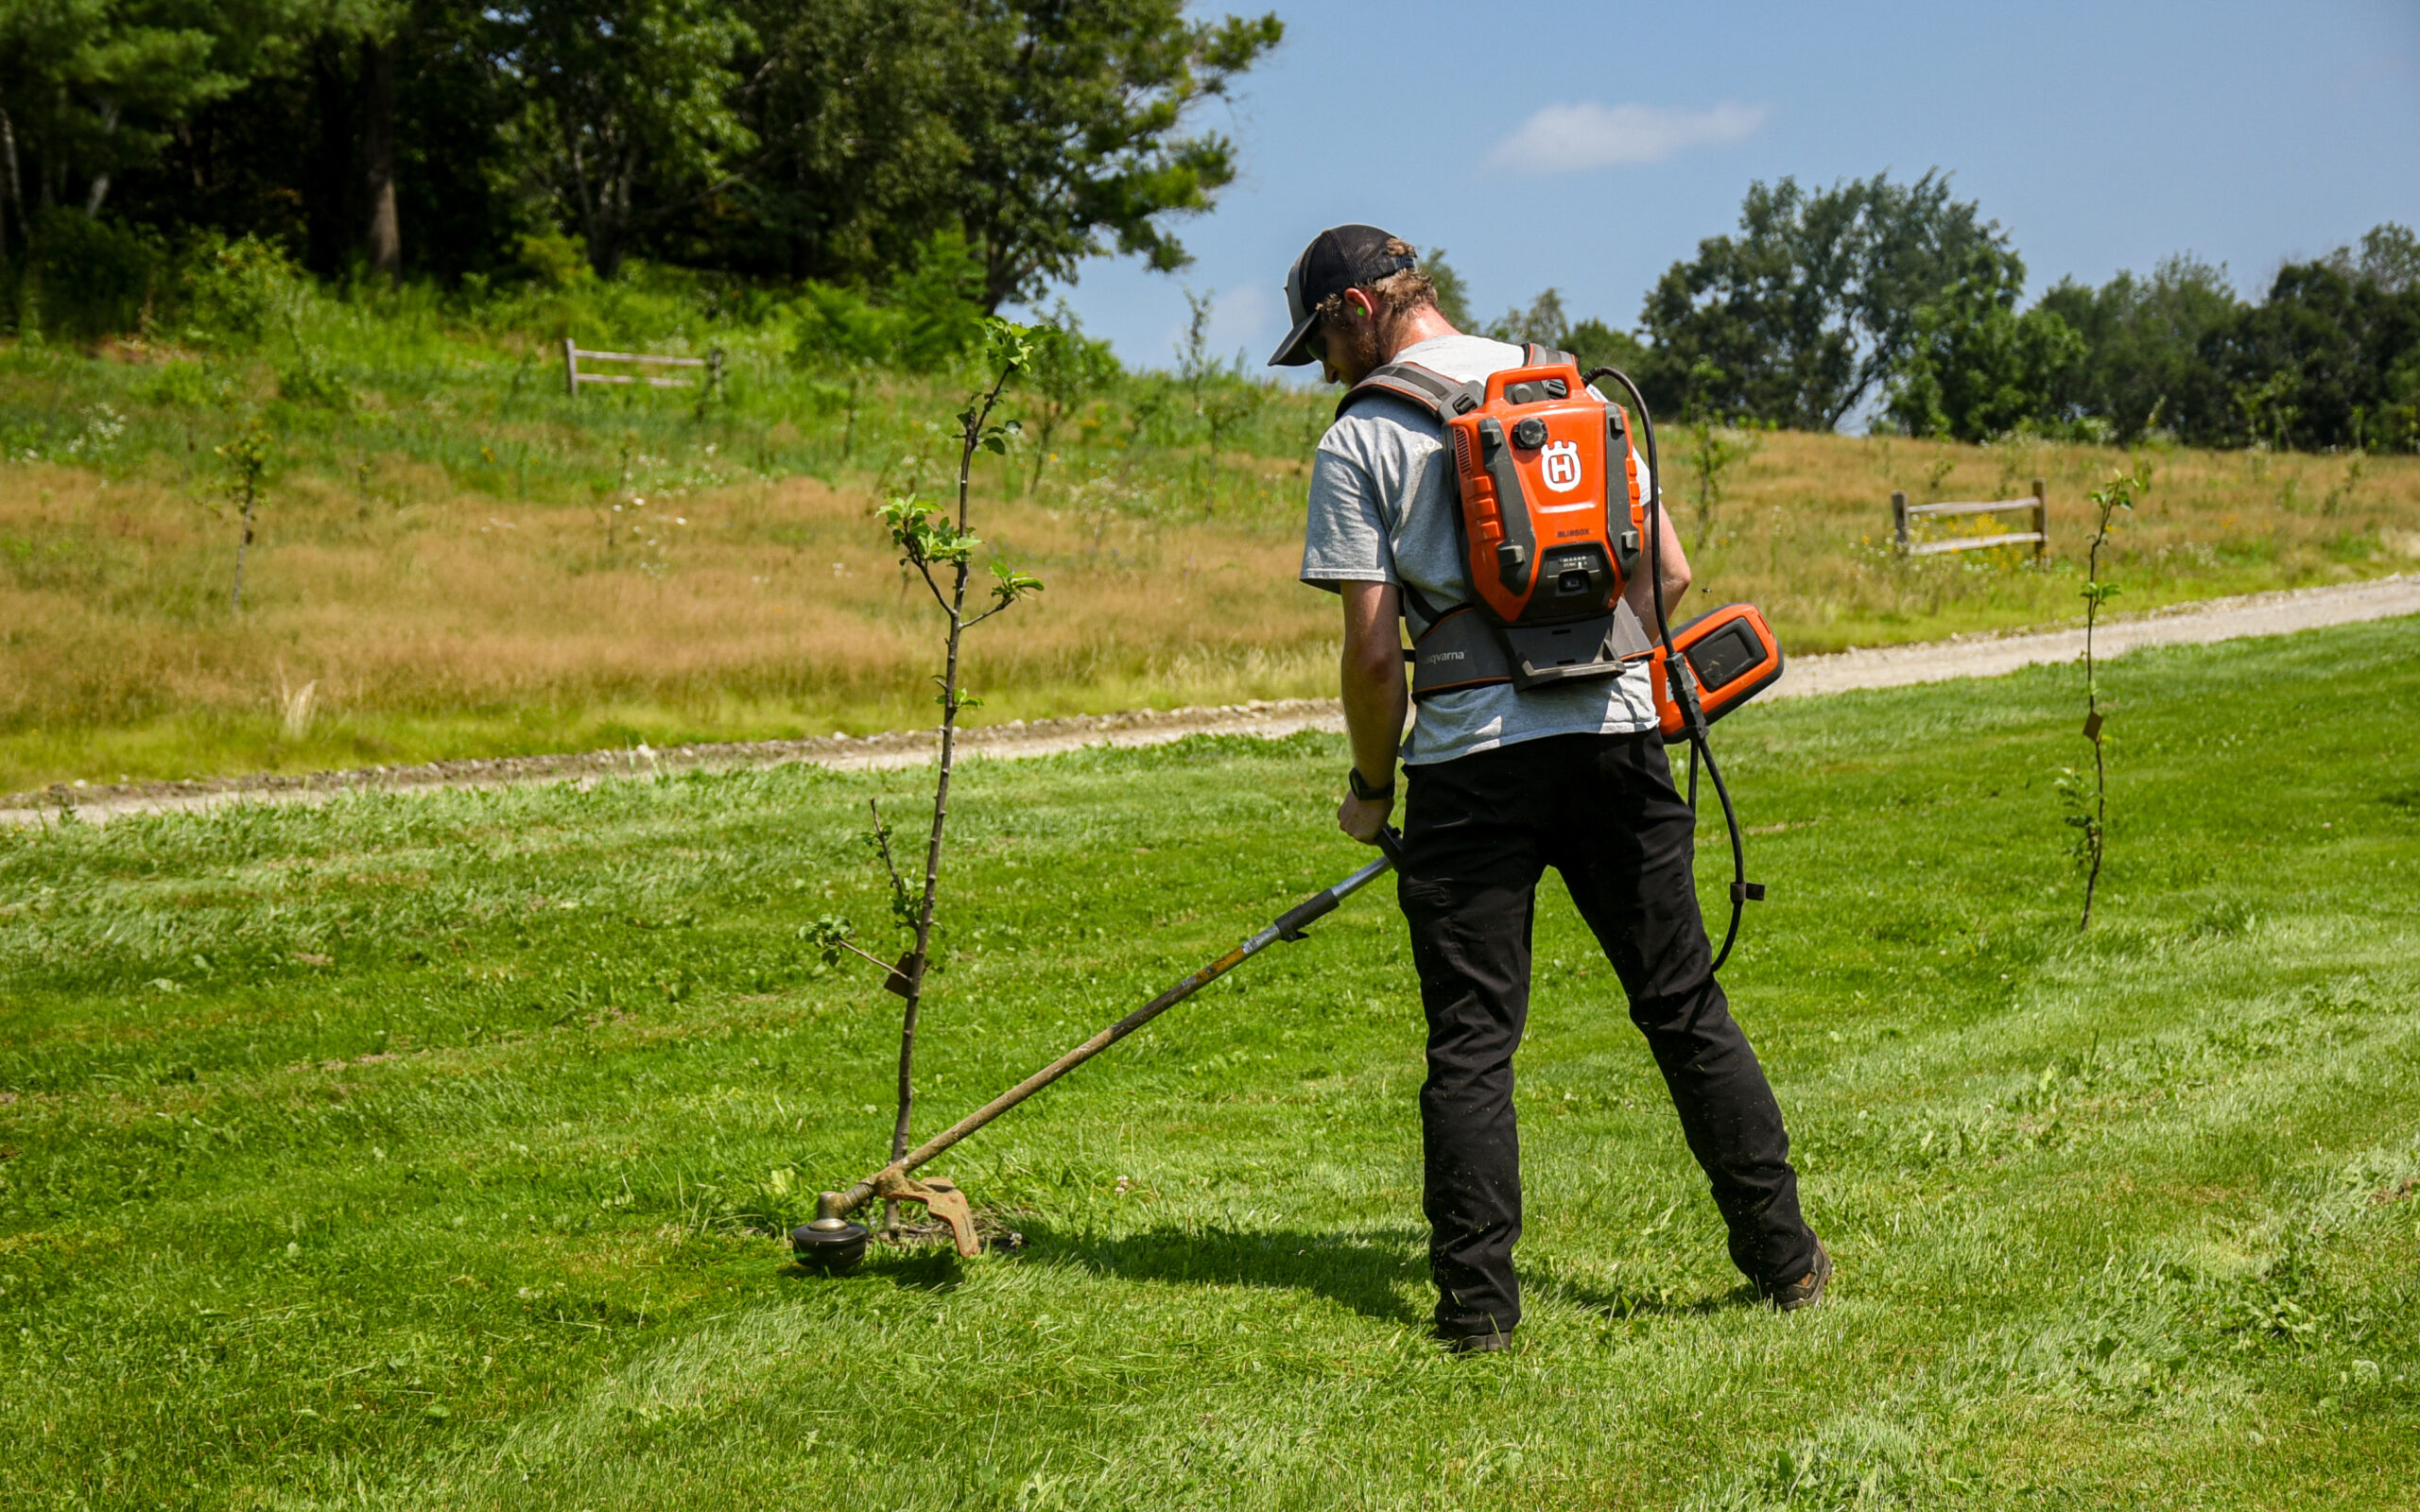 Horticulture member using electric string trimmer around apple trees.